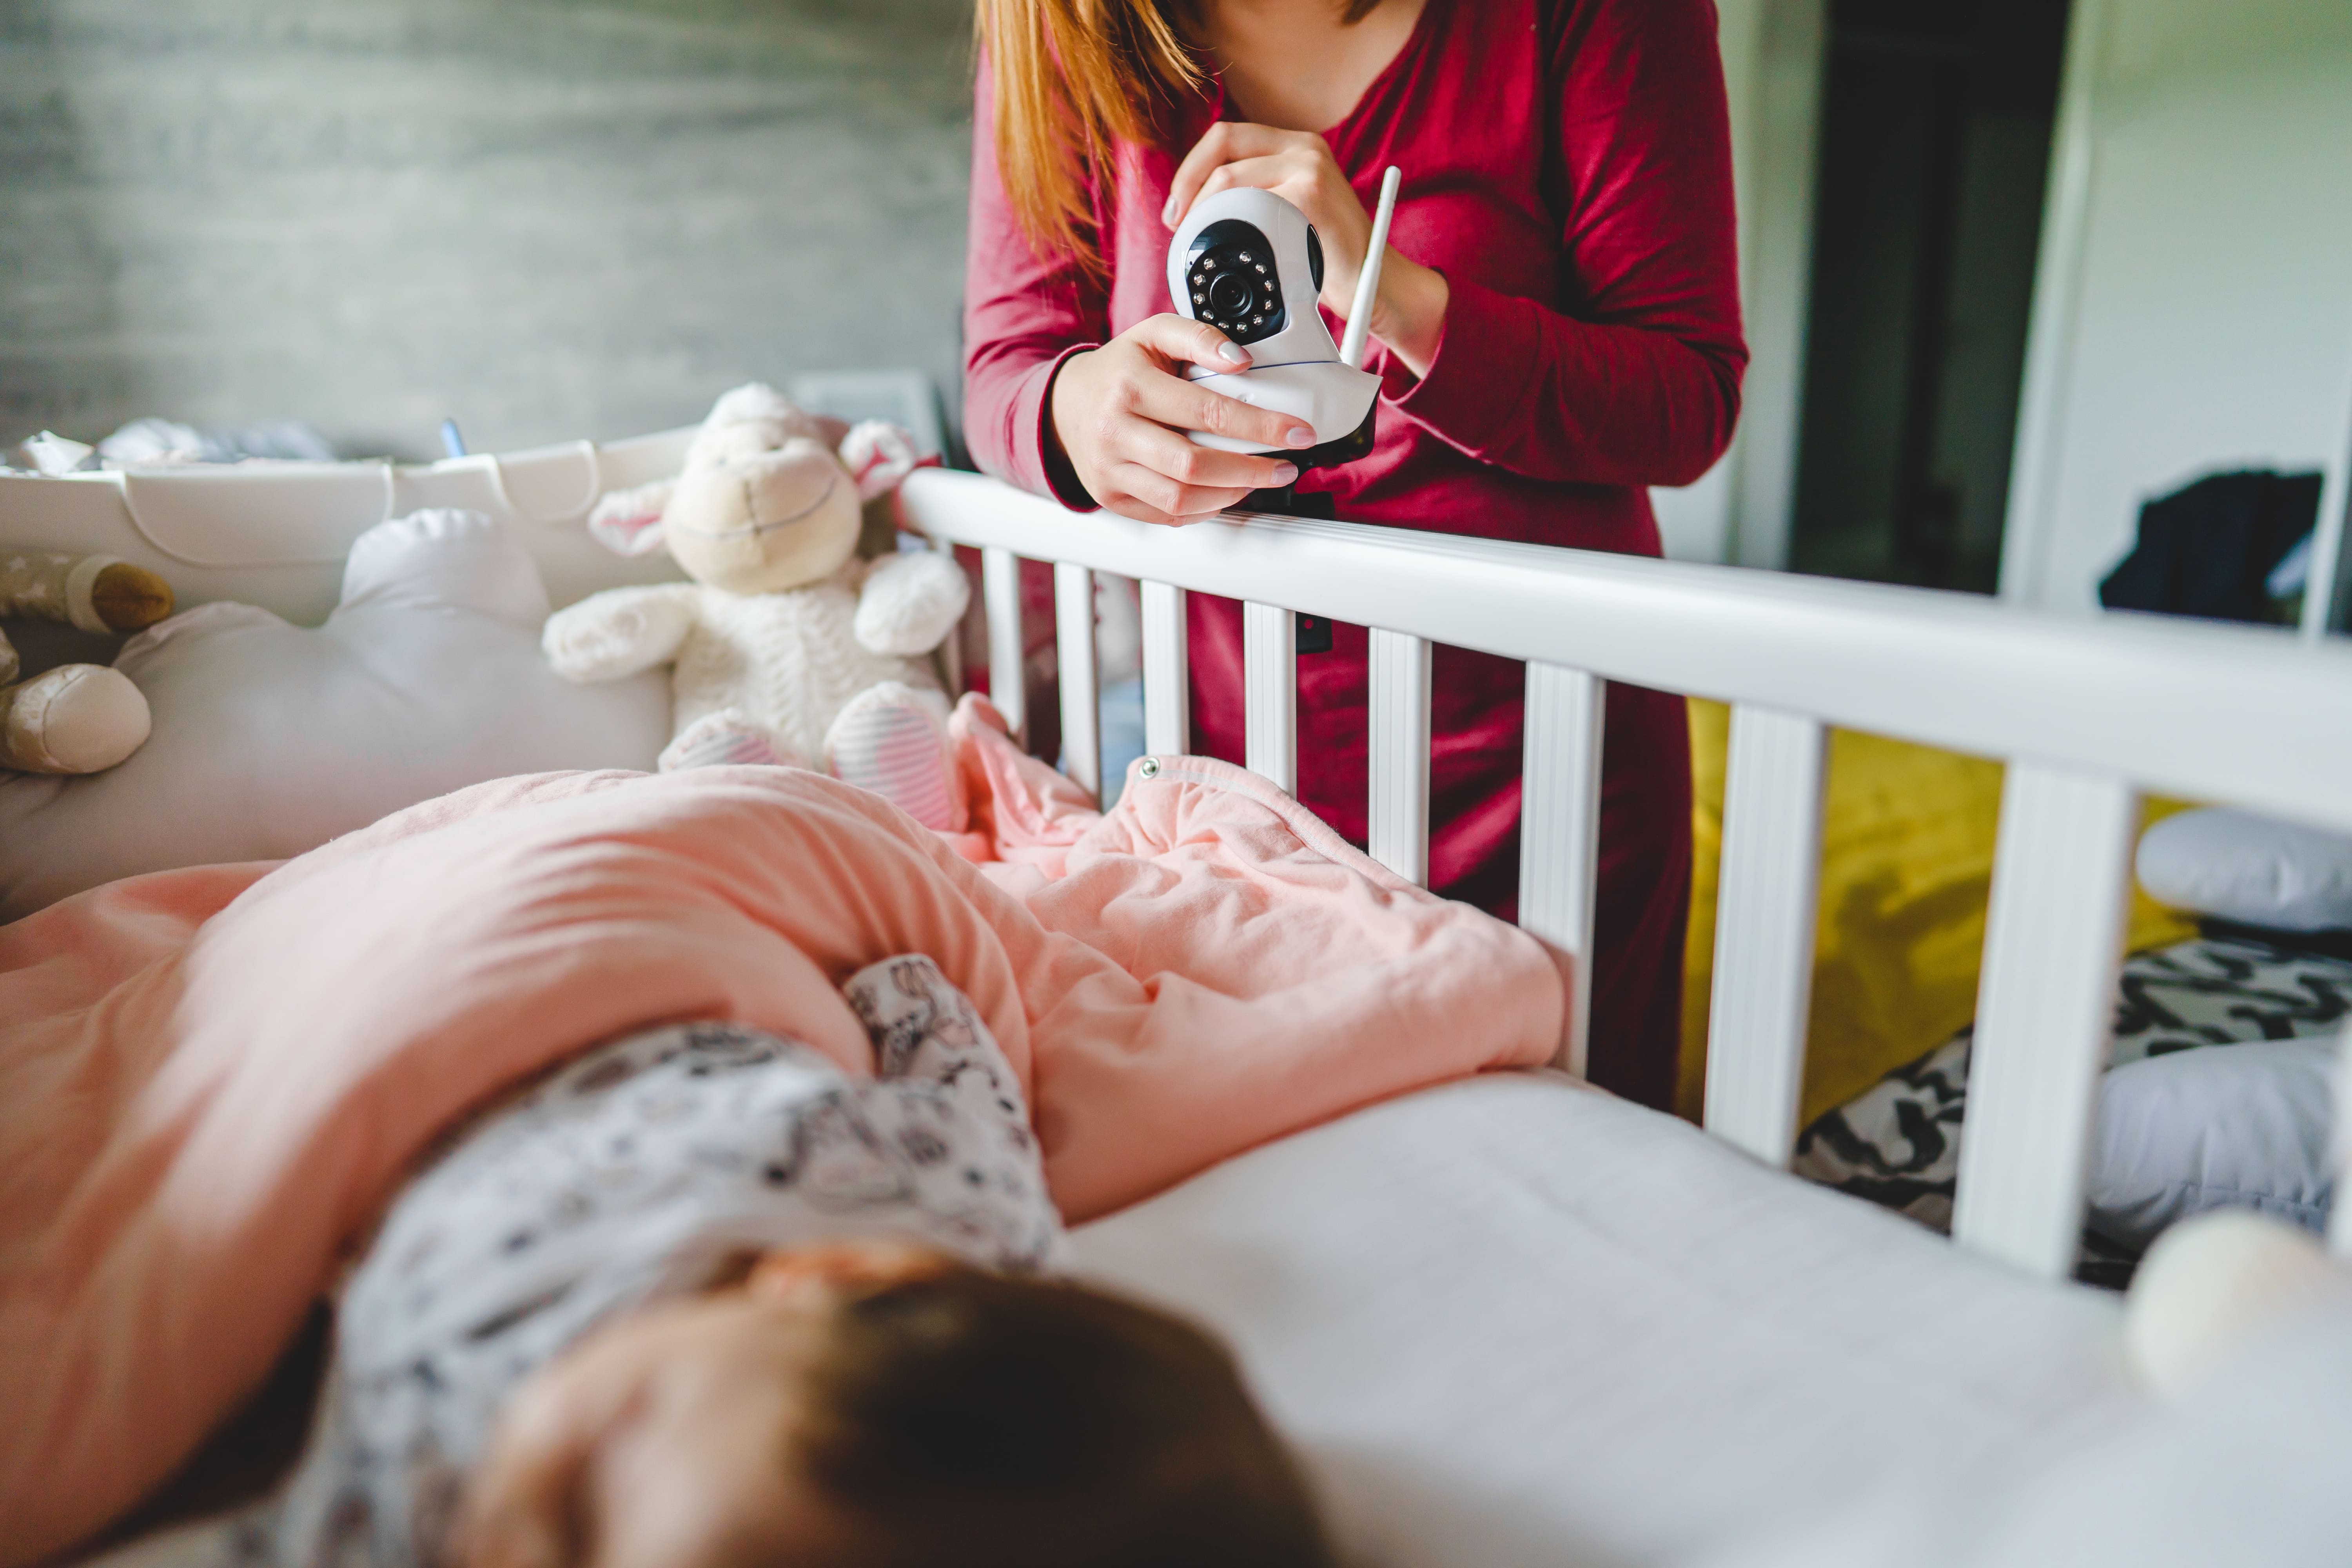 A mum setting up a baby monitoring camera as she prepares to leave the room after getting her baby off to sleep.